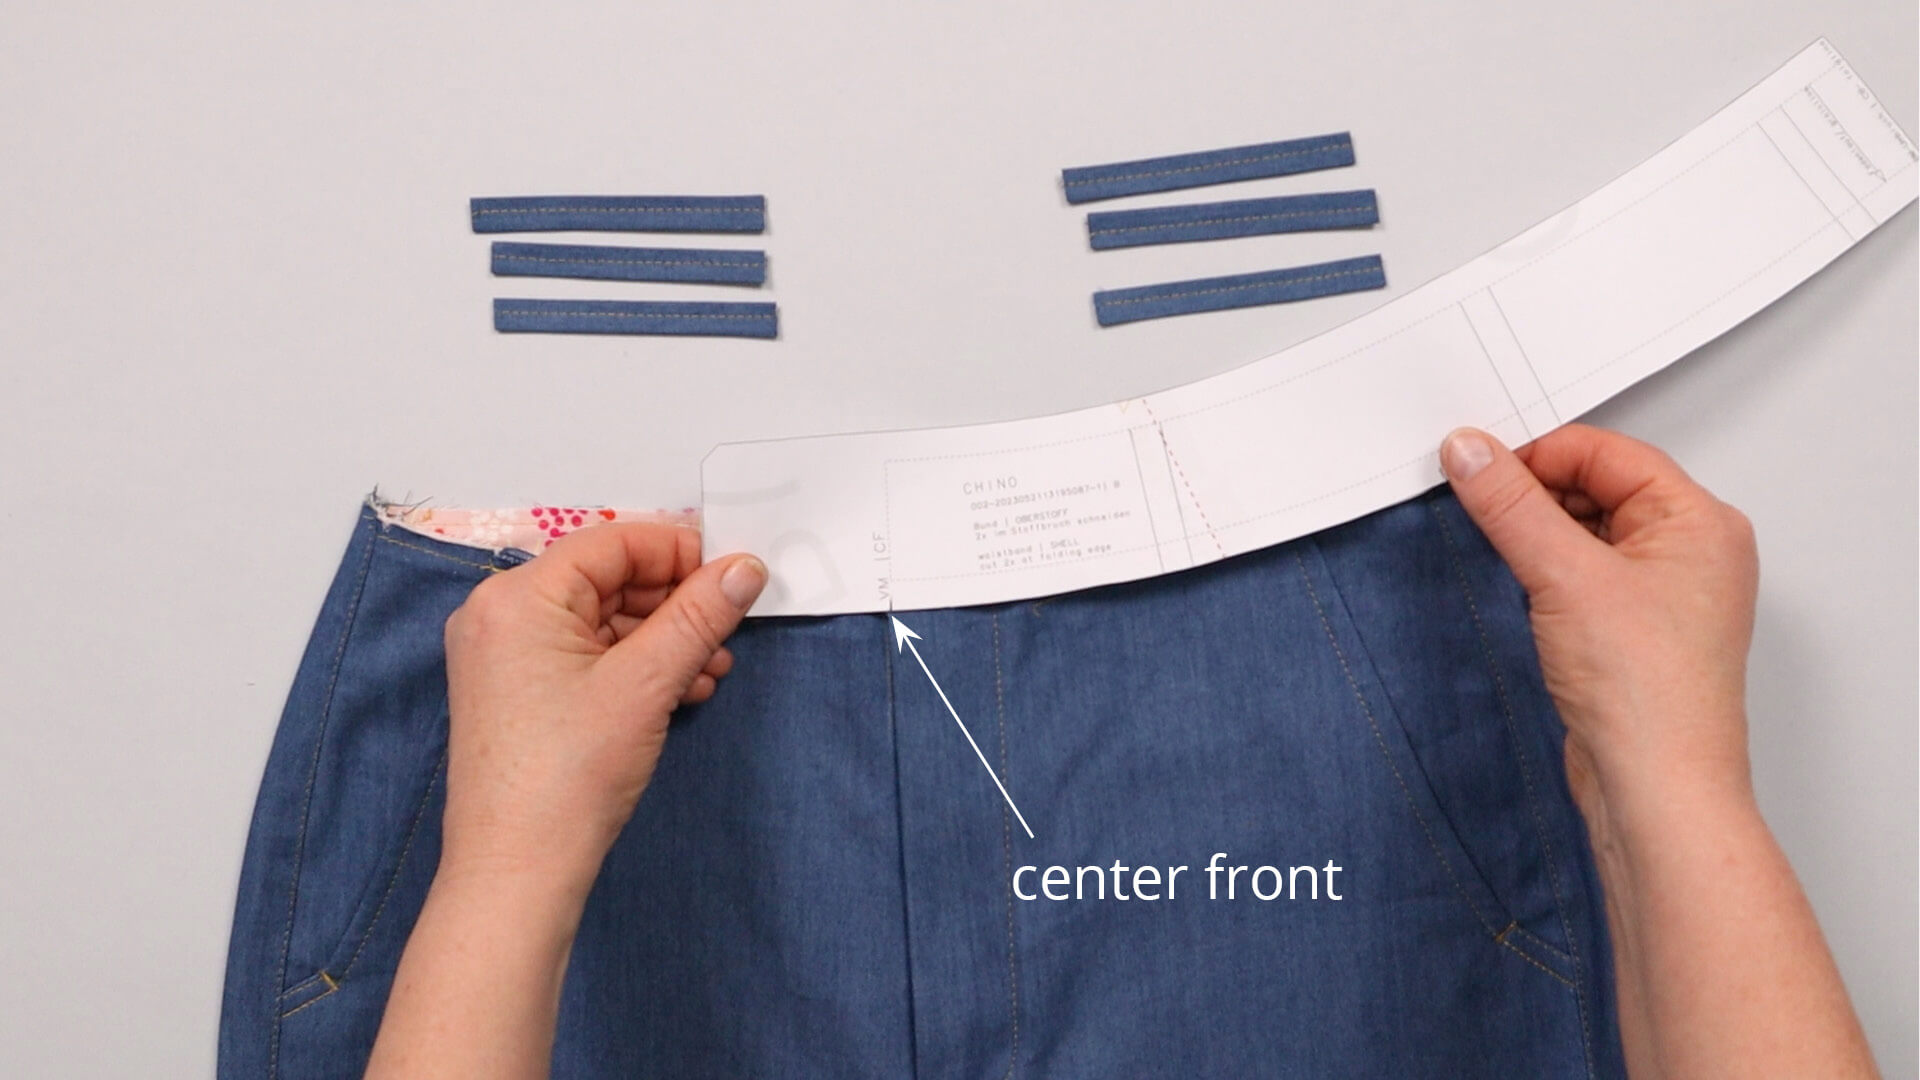 The picture shows how to mark the position of the belt loops on the front trousers.